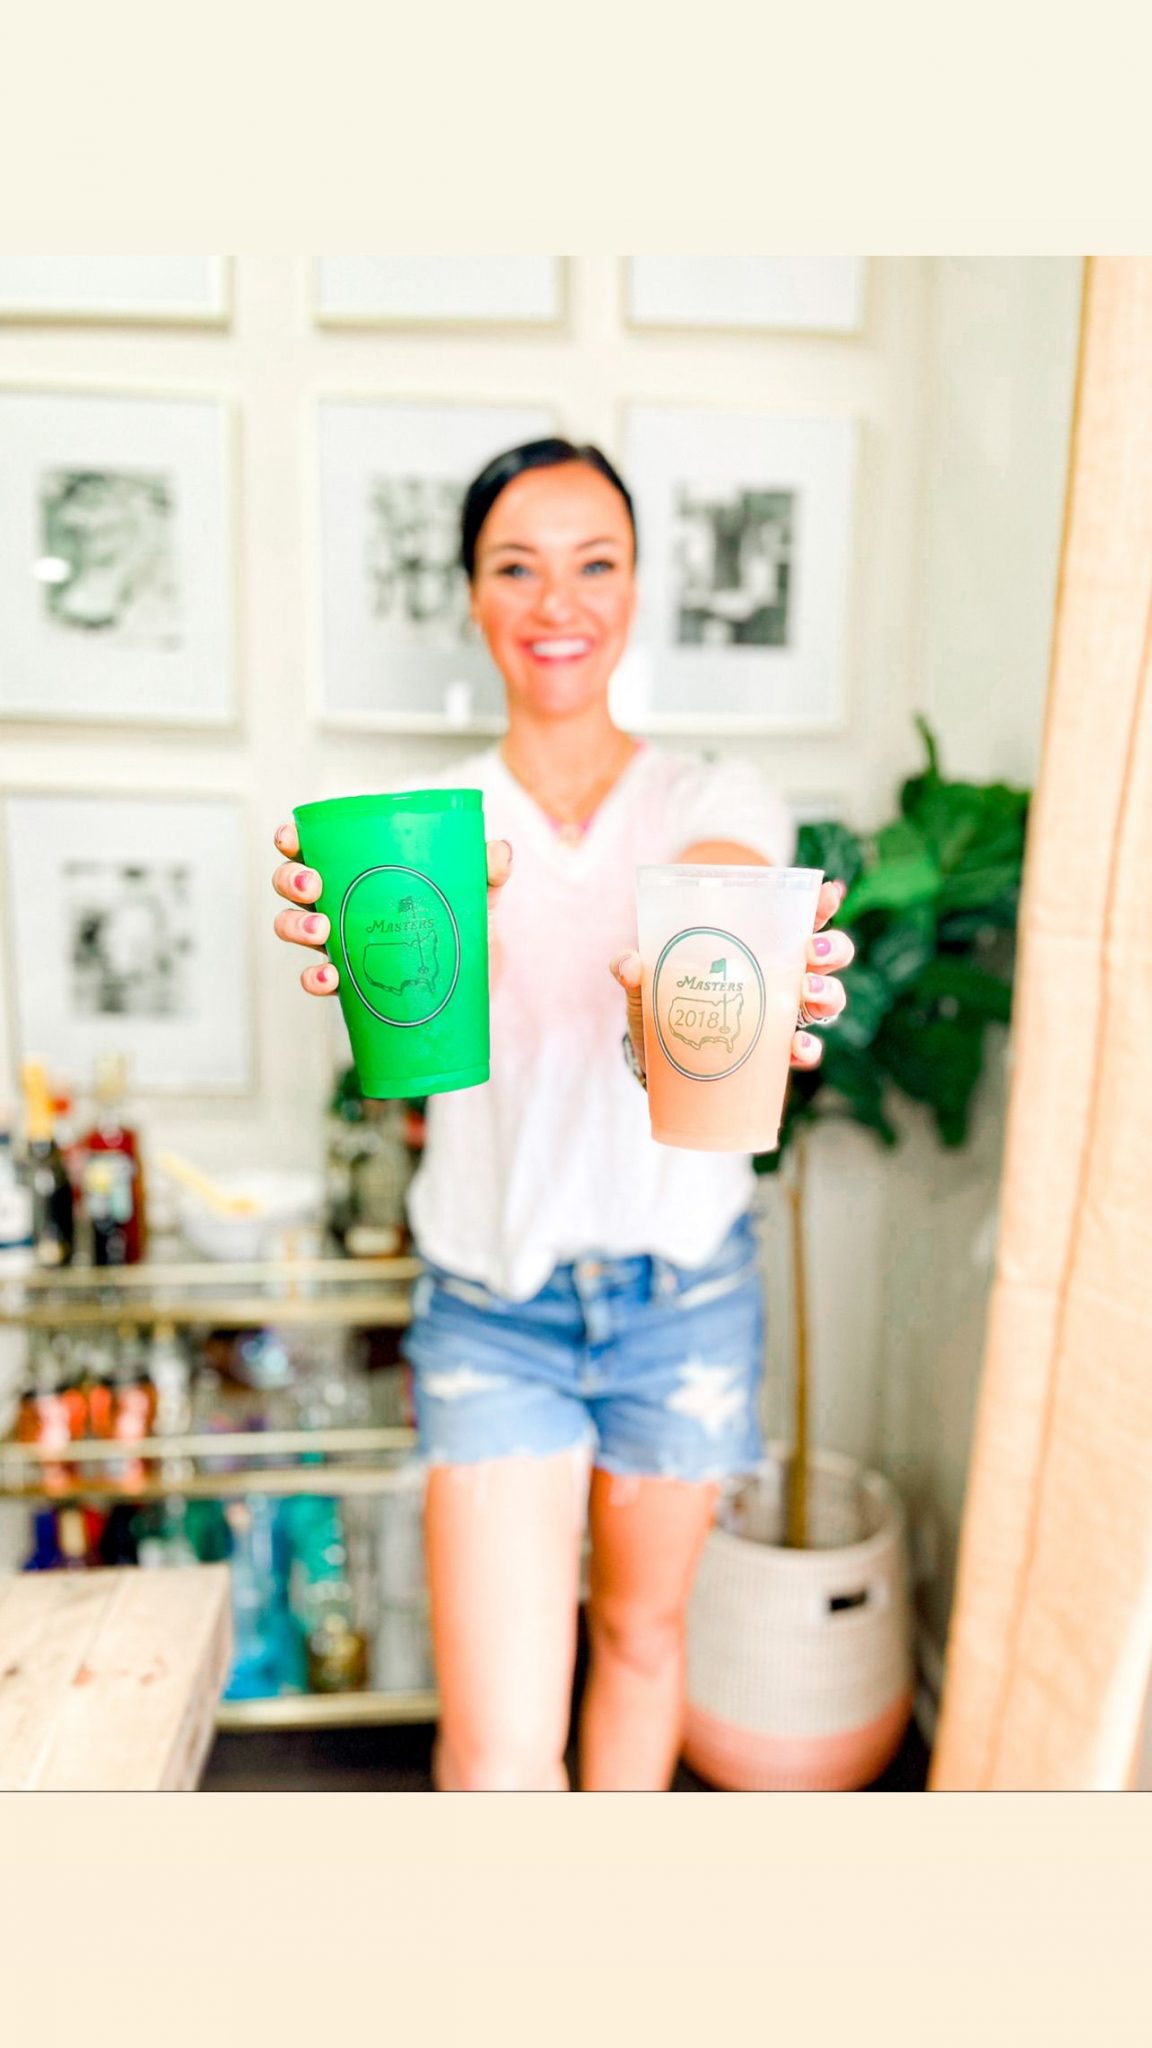 Fashion + Lifestyle blogger, My Life Well Loved, shares her top 5+ light summer cocktail ideas! Click NOW to see her ideas!